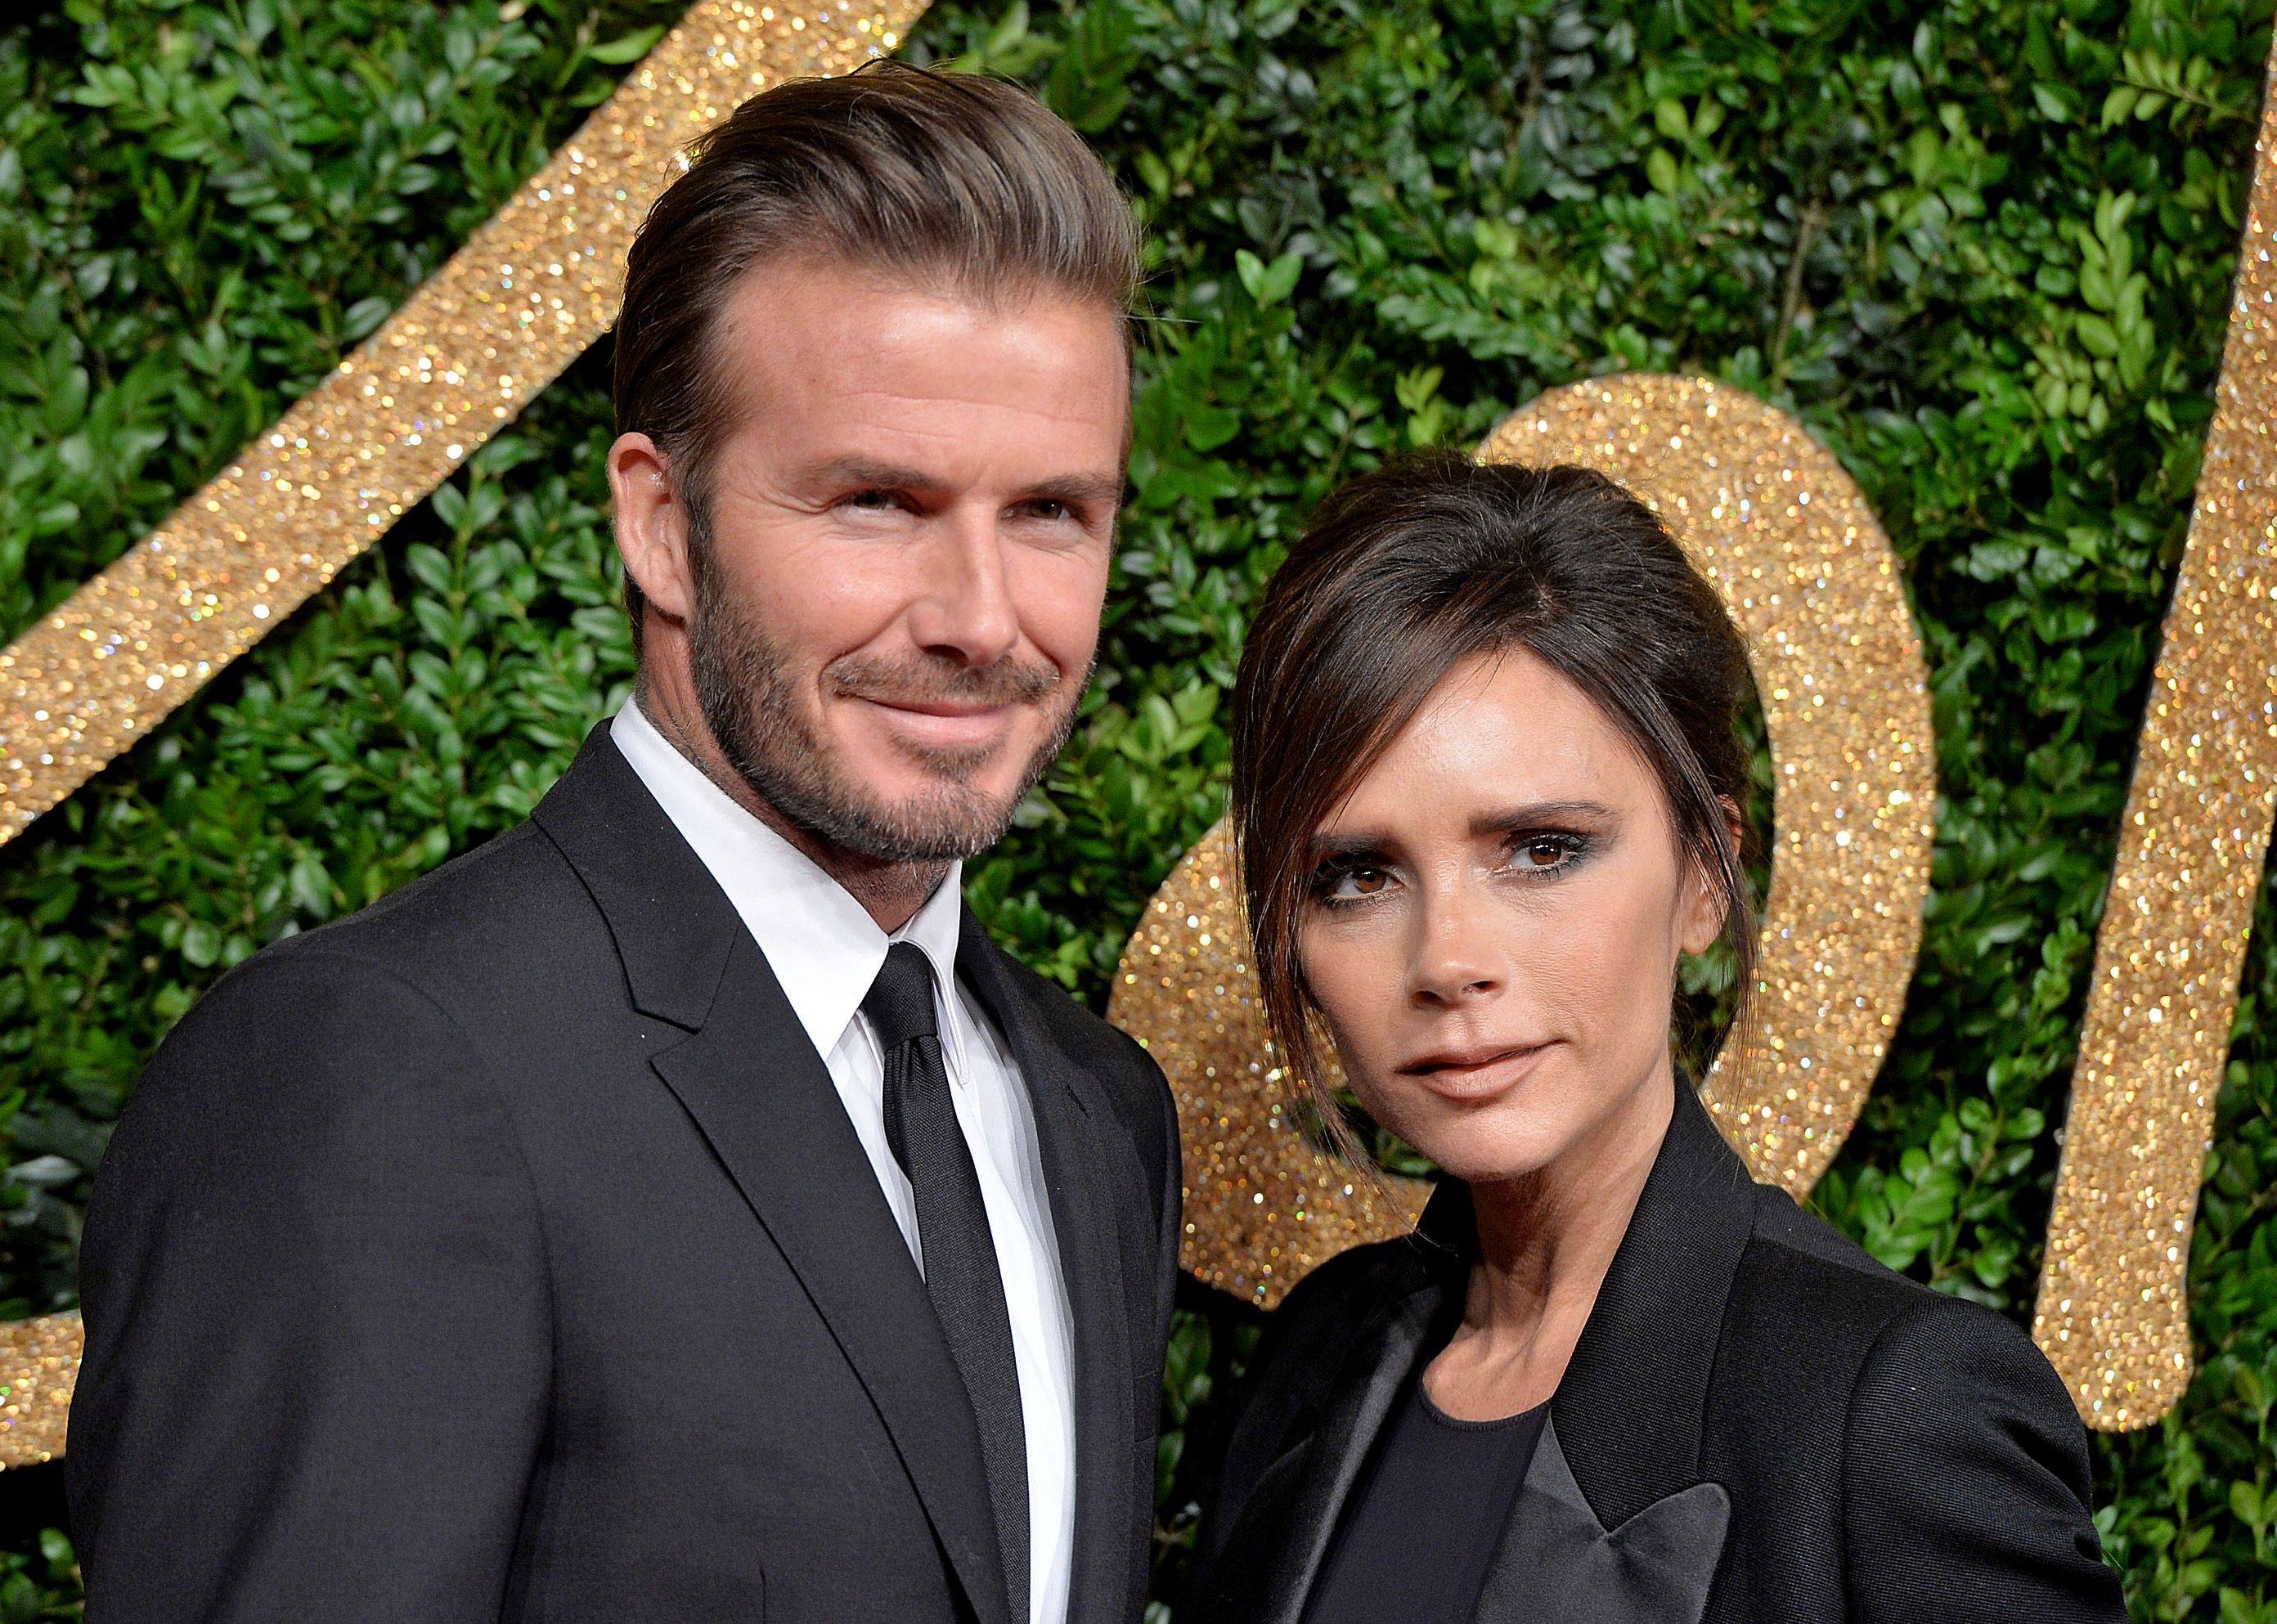 David Beckham and Victoria Beckham attend the British Fashion Awards 2015 at London Coliseum on November 23, 2015 in London, England. | Source: Getty Images